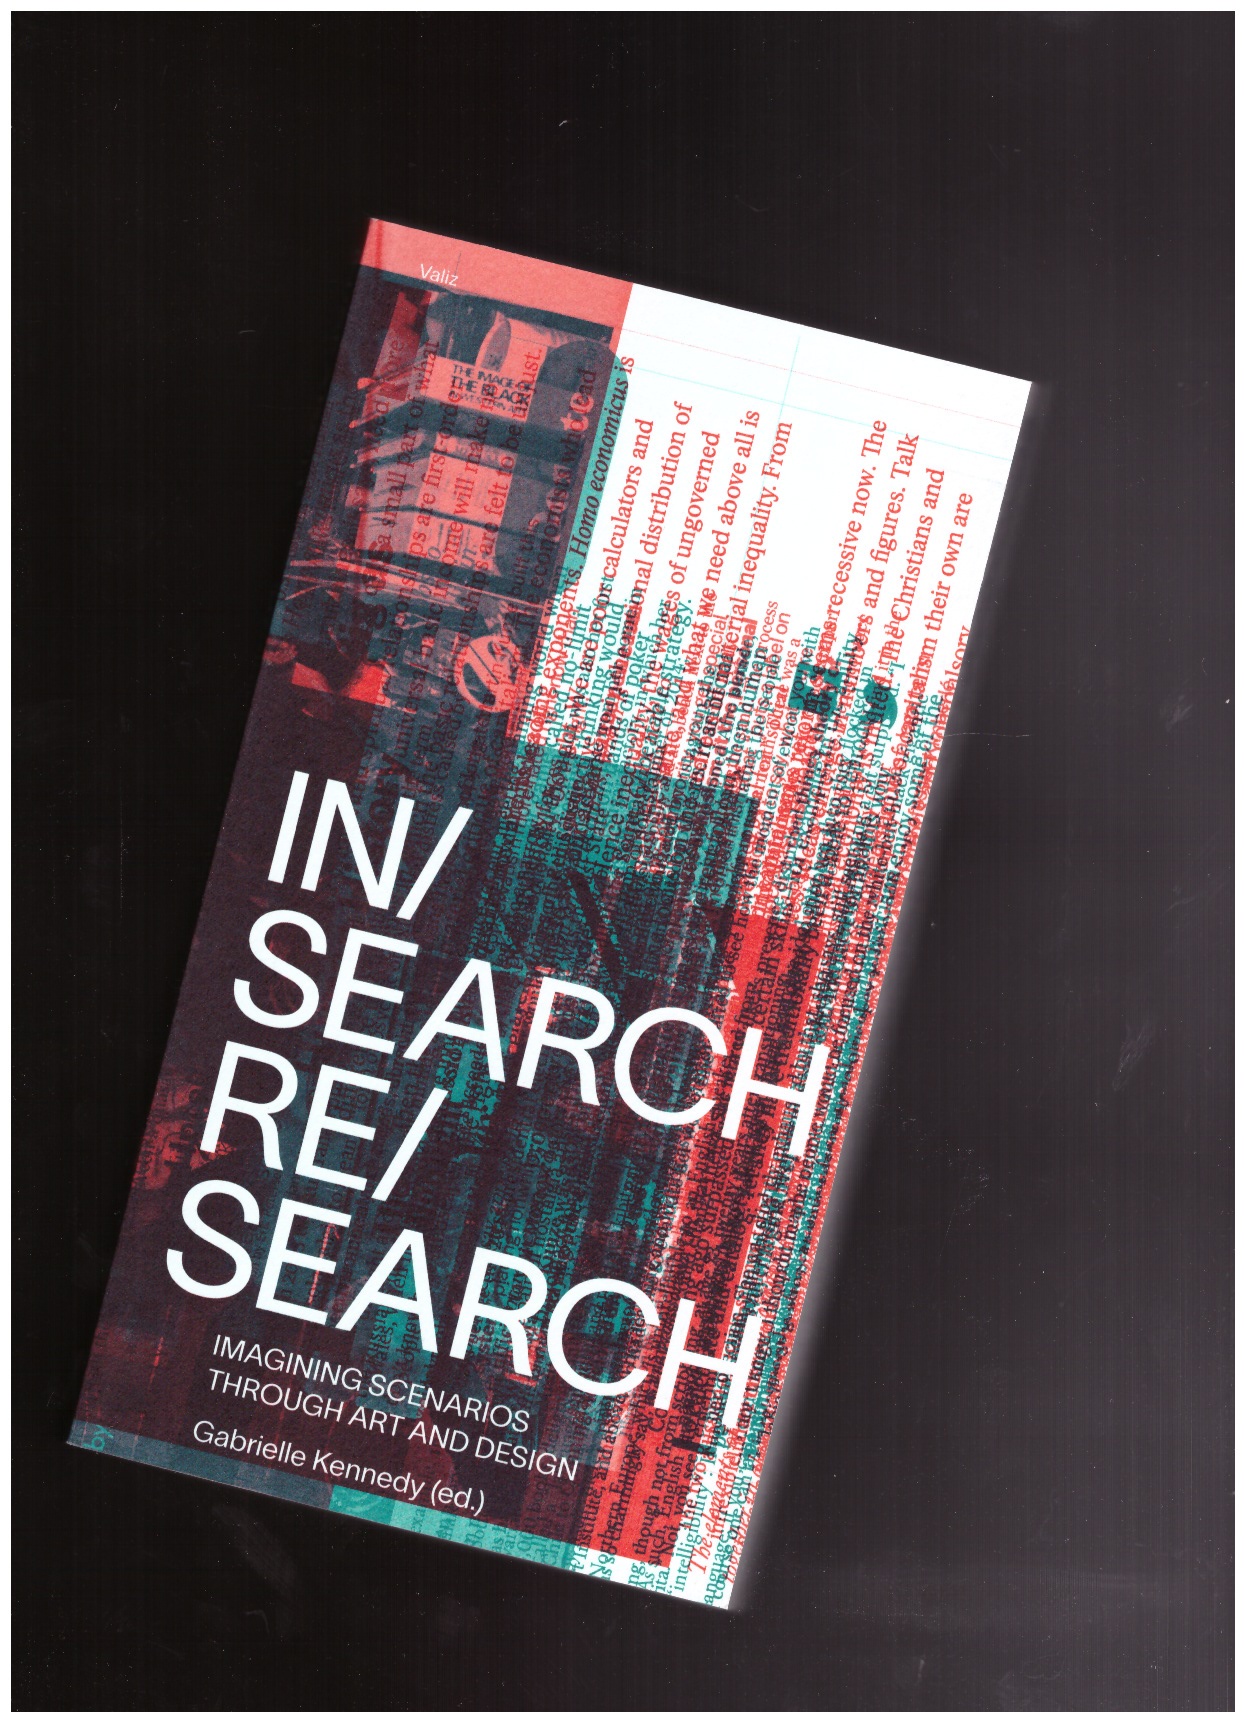 KENNEDY, Gabrielle (ed.) - IN/Search RE/Search. Imagining Scenarios Through Art and Design